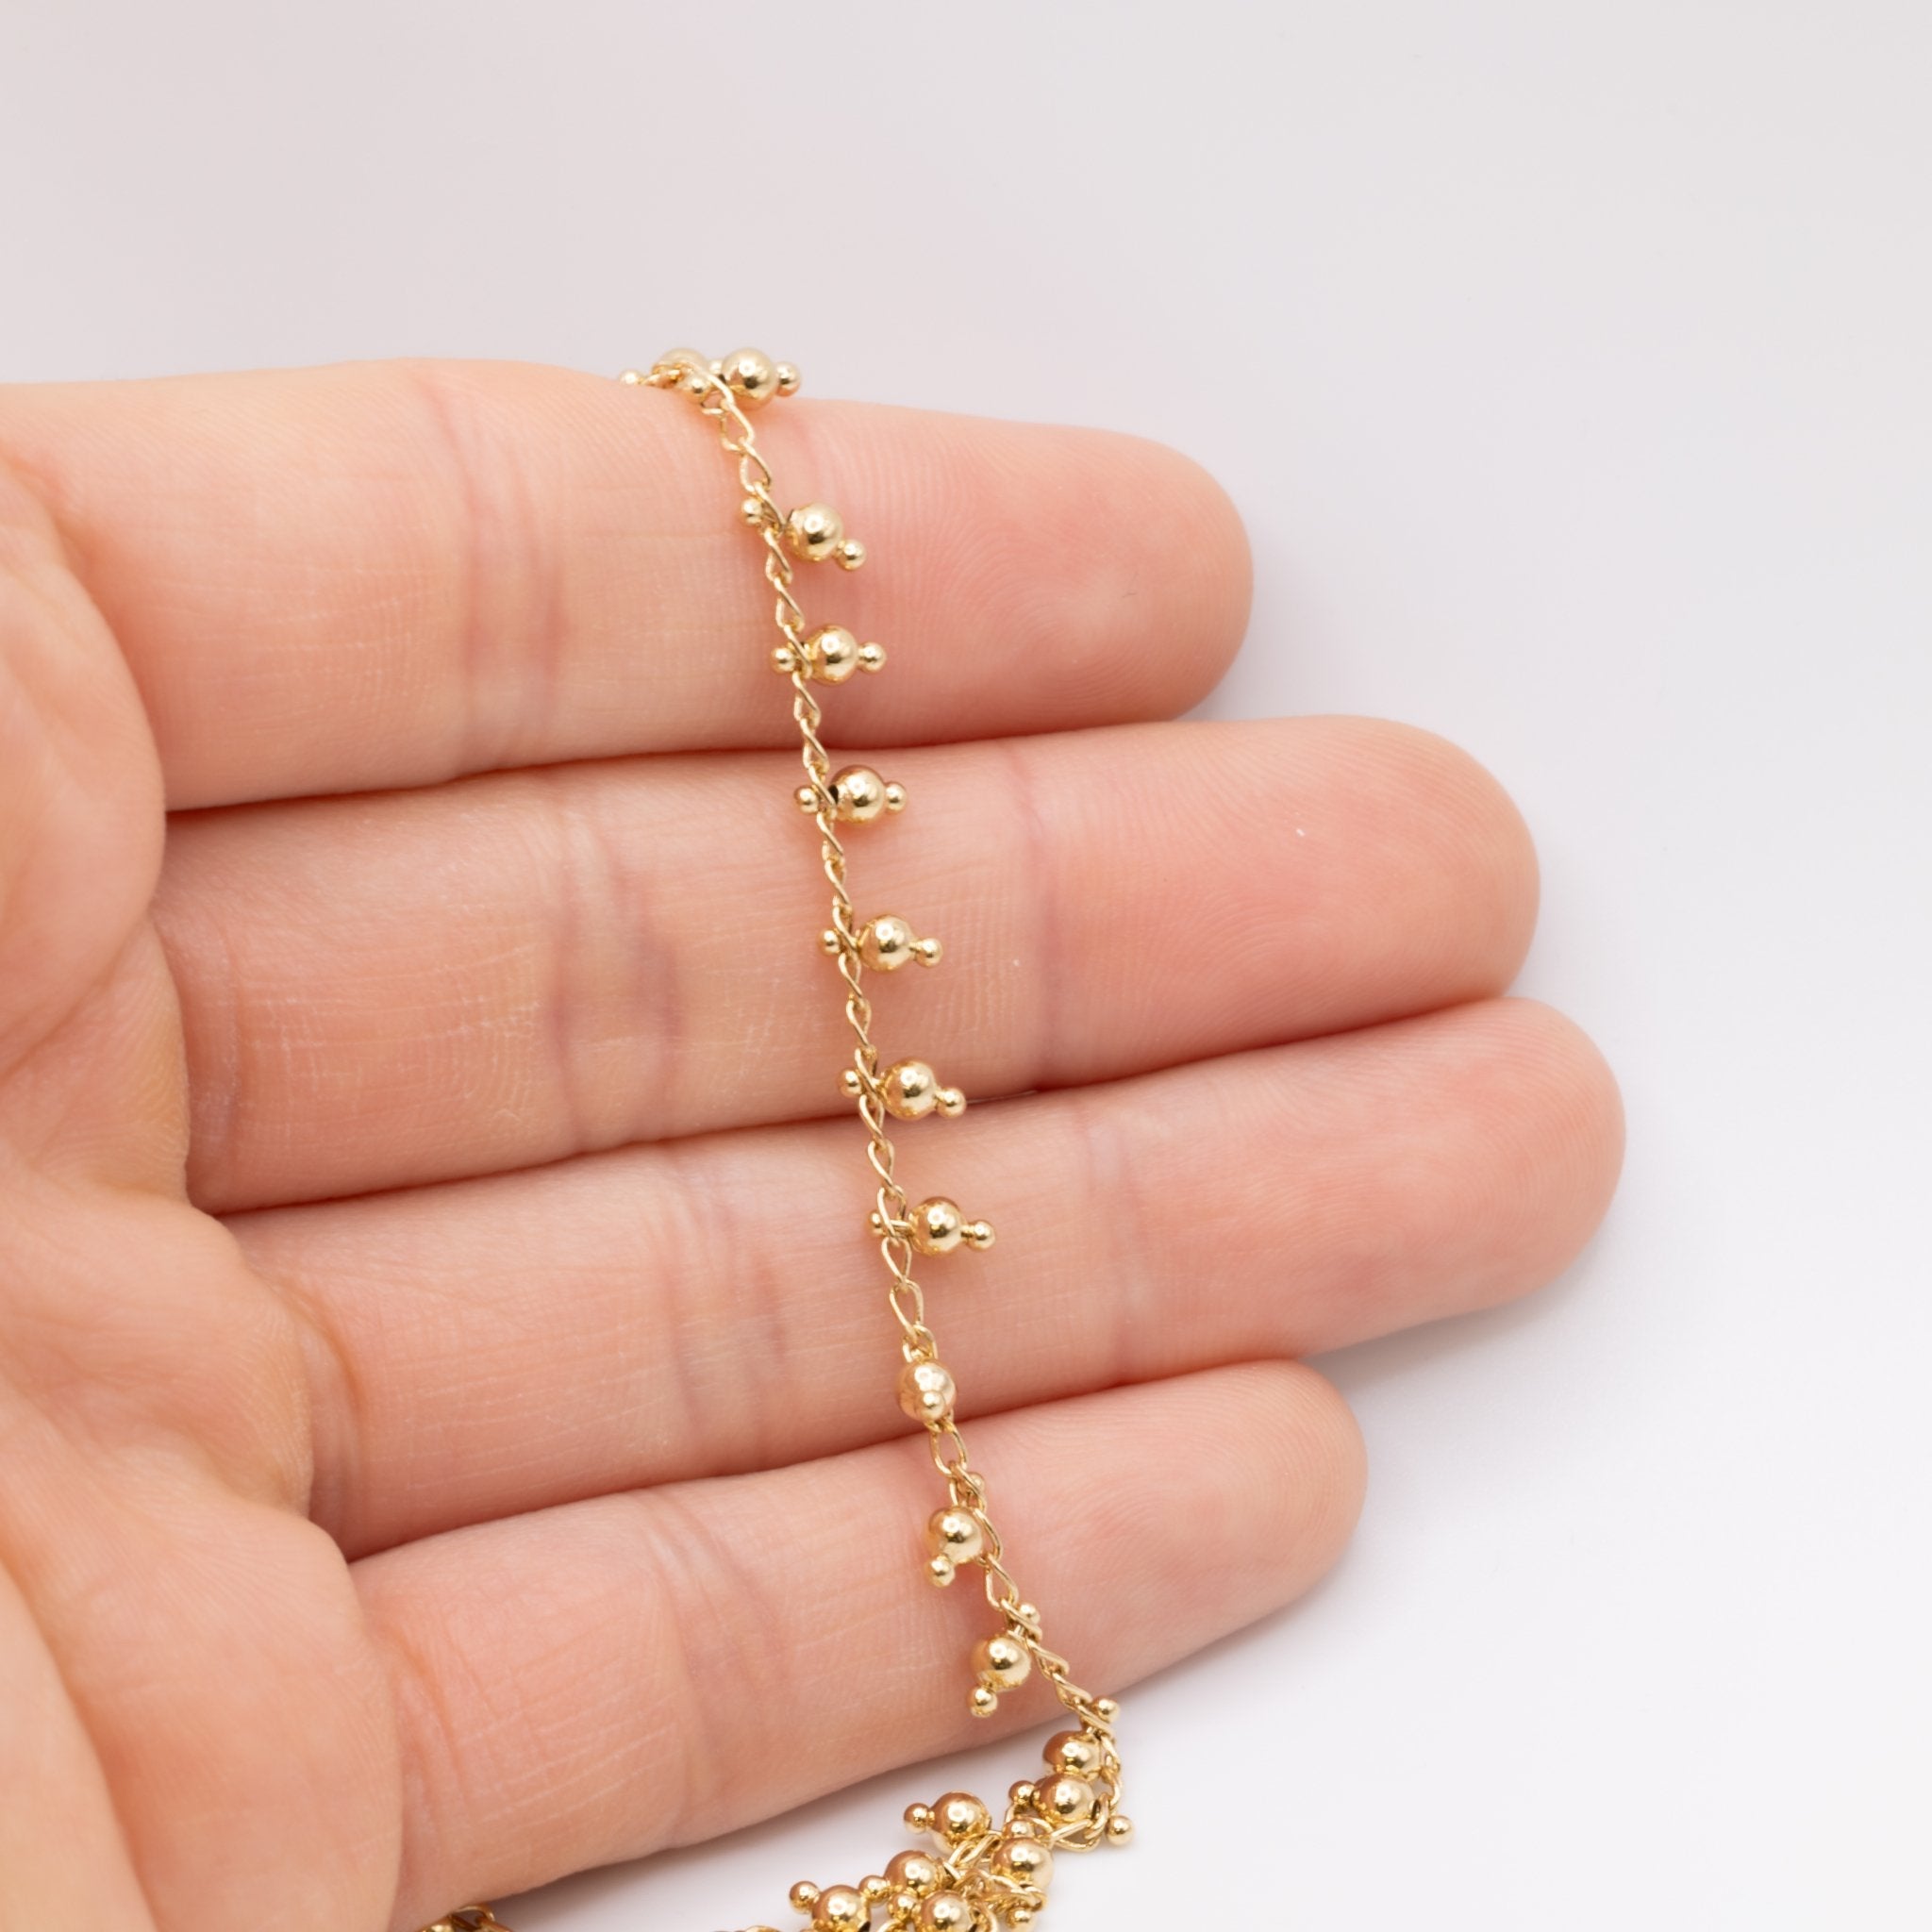 Jessica Bead Dew Drop Chain, 14K Gold Overlay Plating, Wholesale Jewelry Chain - HarperCrown